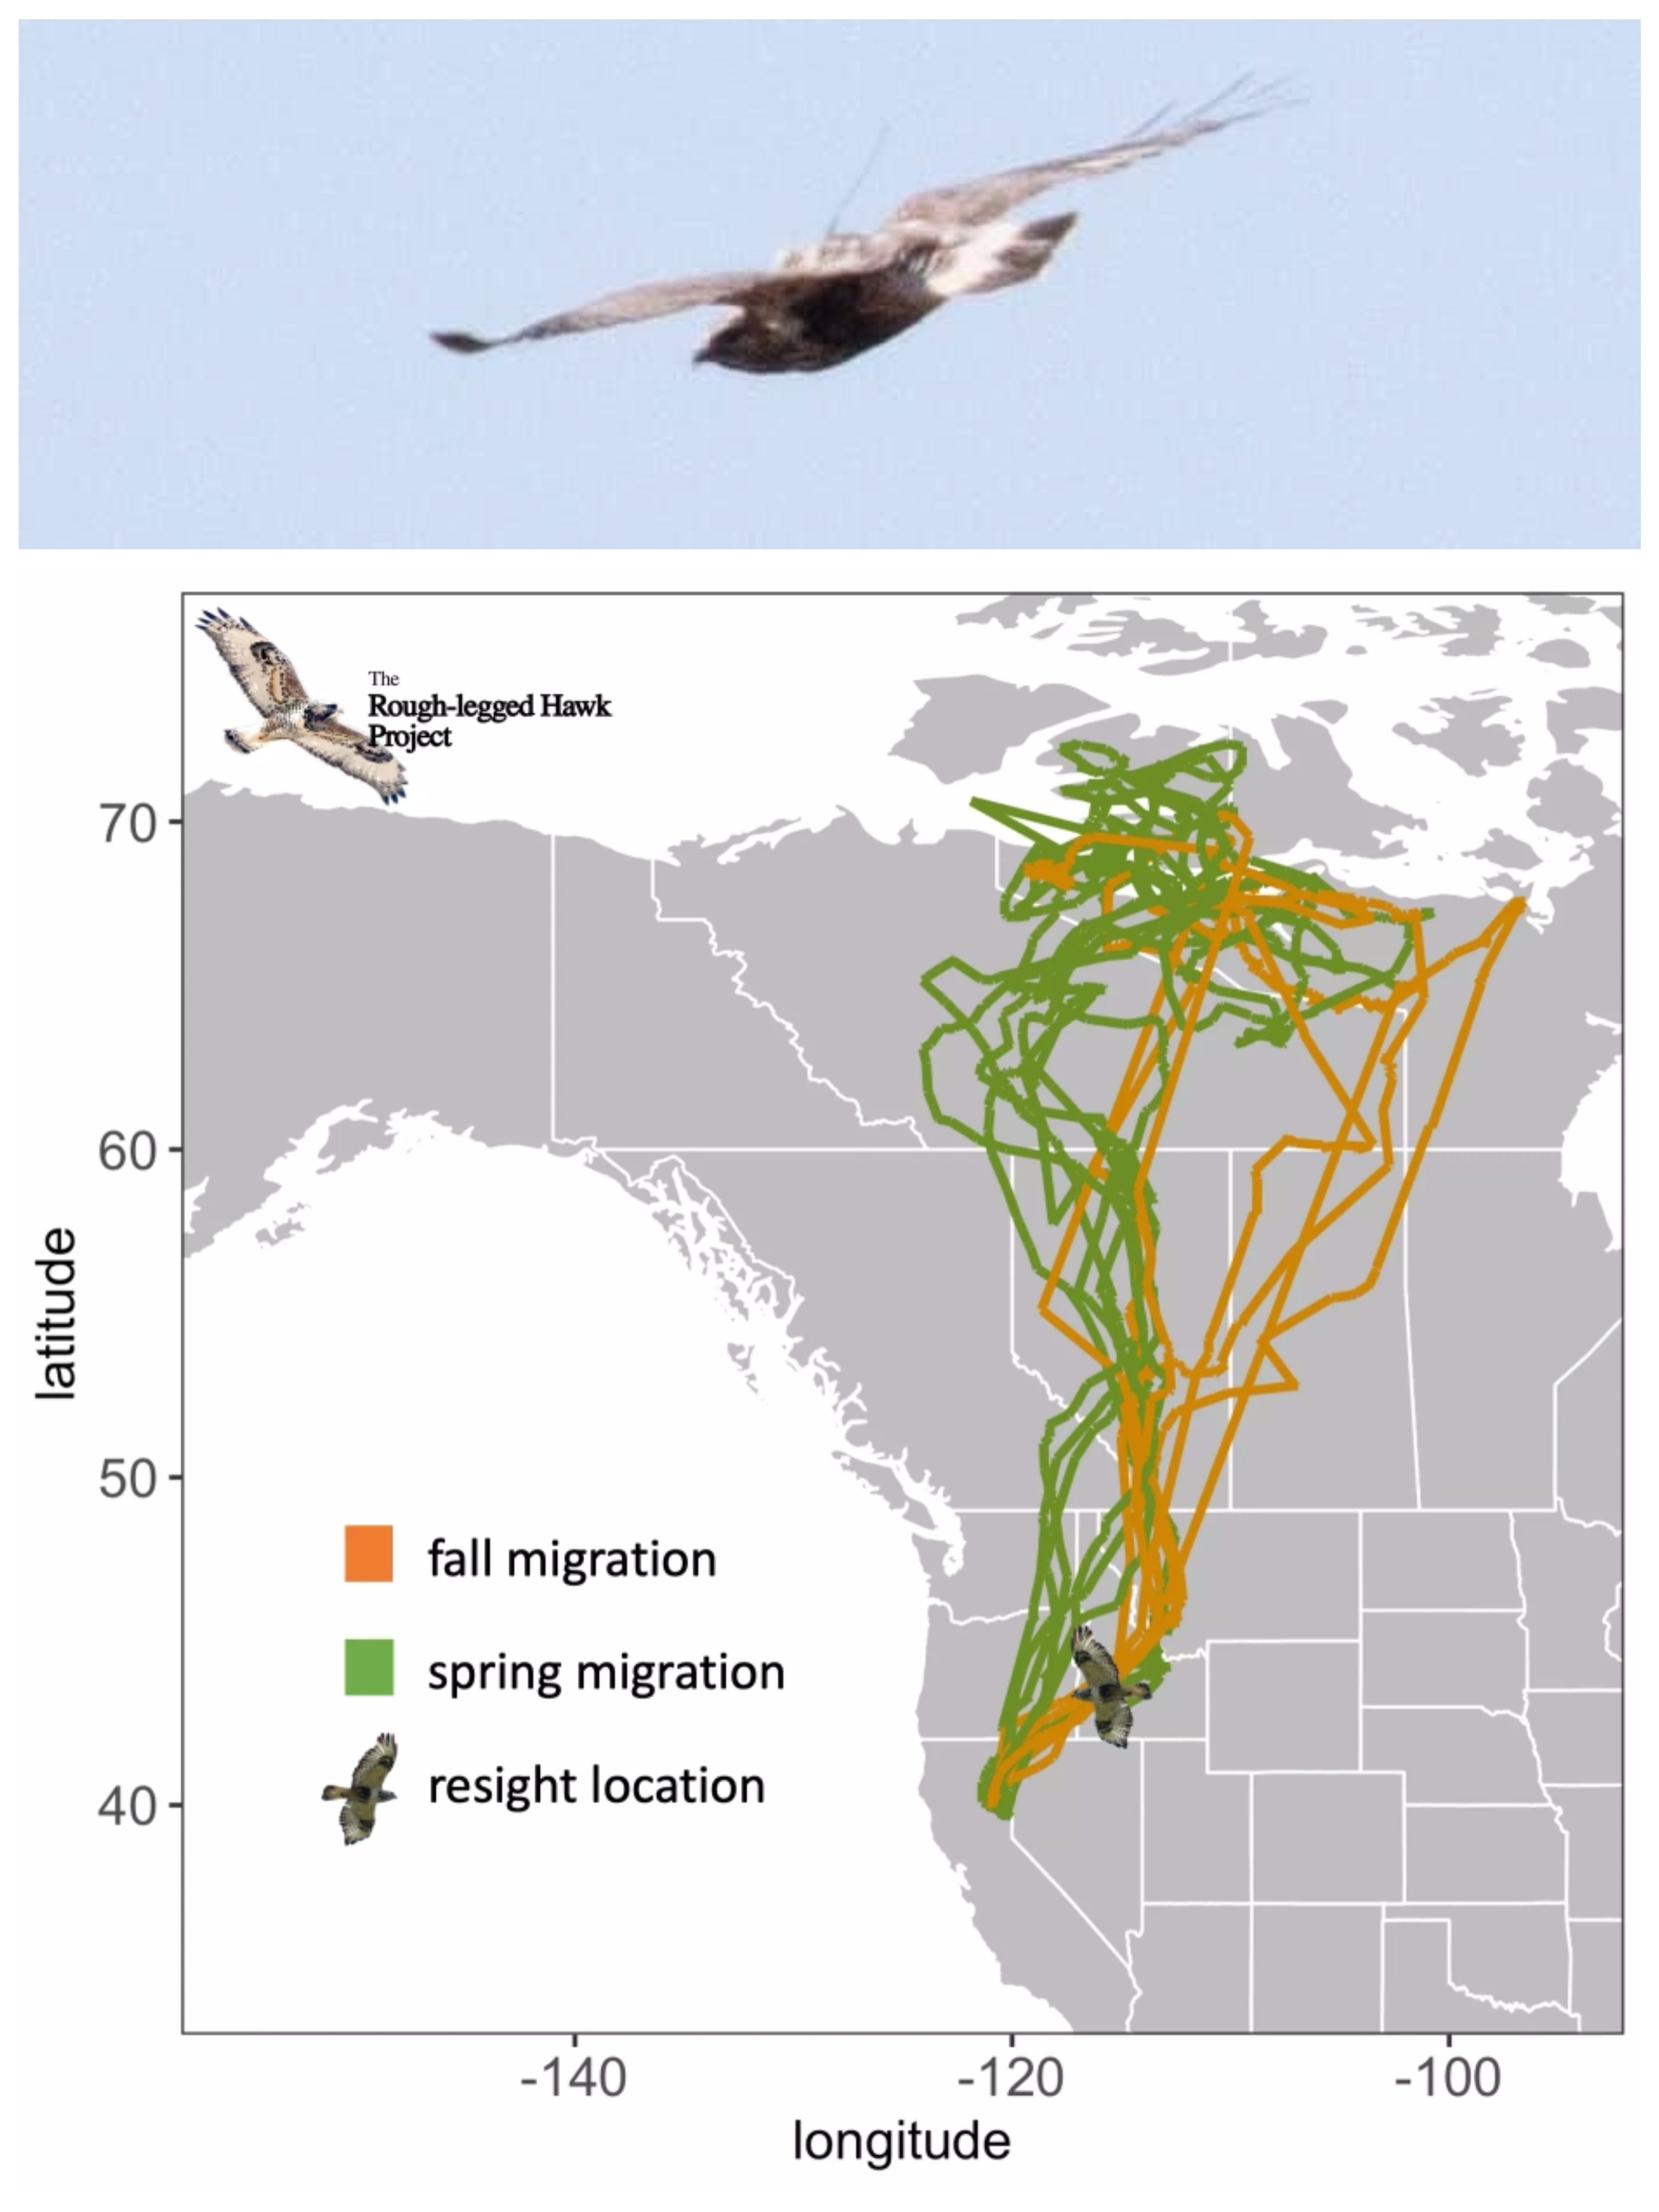 top image is a grainy photo shows a soaring hawk with a small antenna visible on its back. Lower image is a map of North America with tracks from this hawk. The tracks show spring migration from northern california with a wandering track leading north to the islands above Canada. Fall migration shows a wandering zigzag path leading south back to the starting location in california